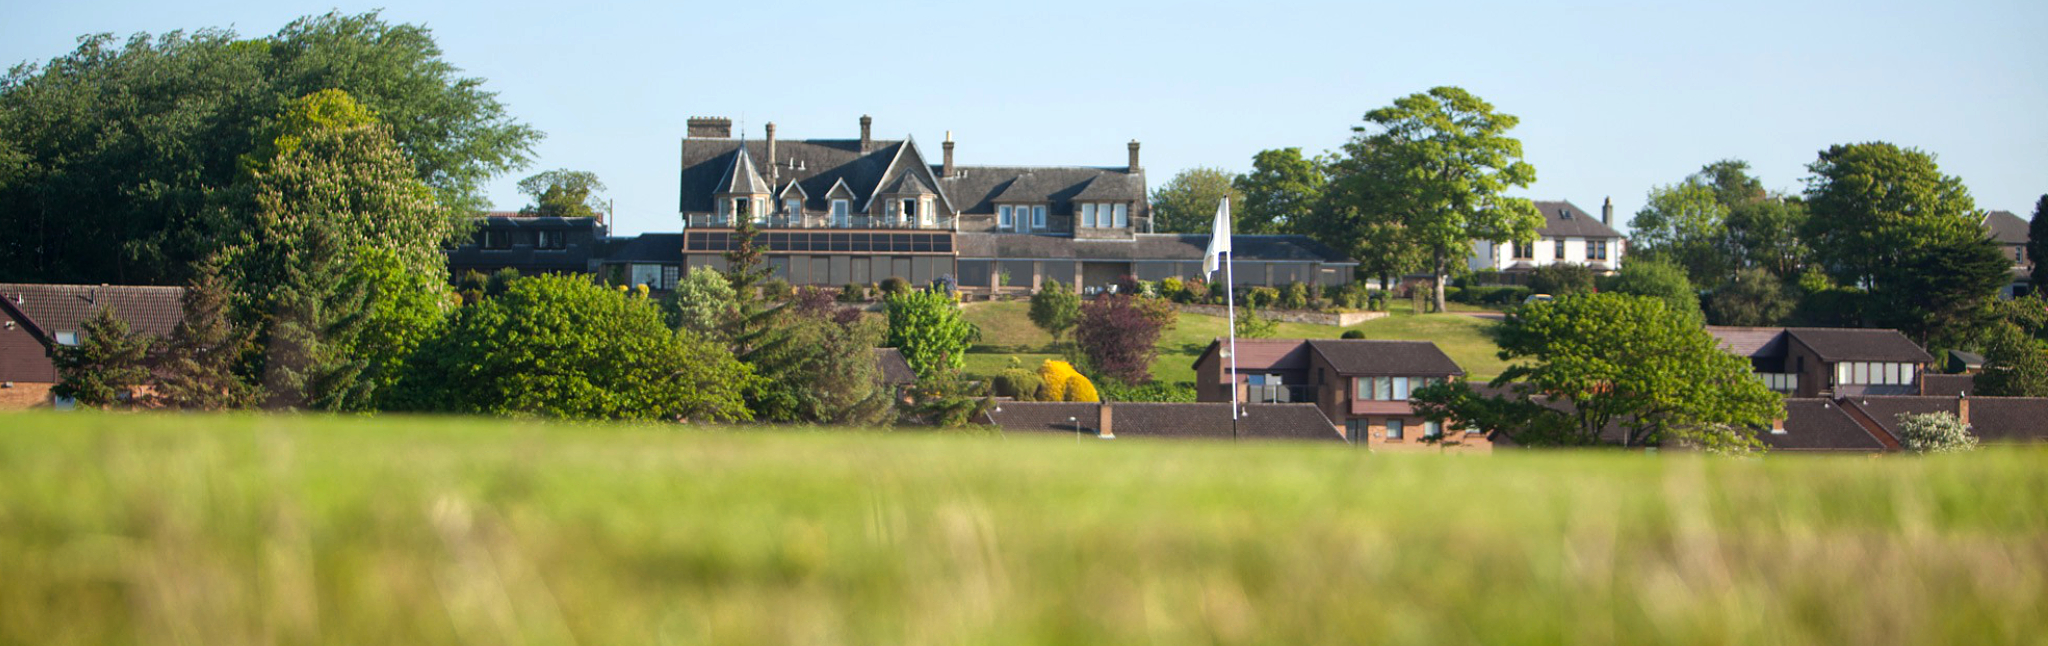 The Old Manor Hotel from the golf course